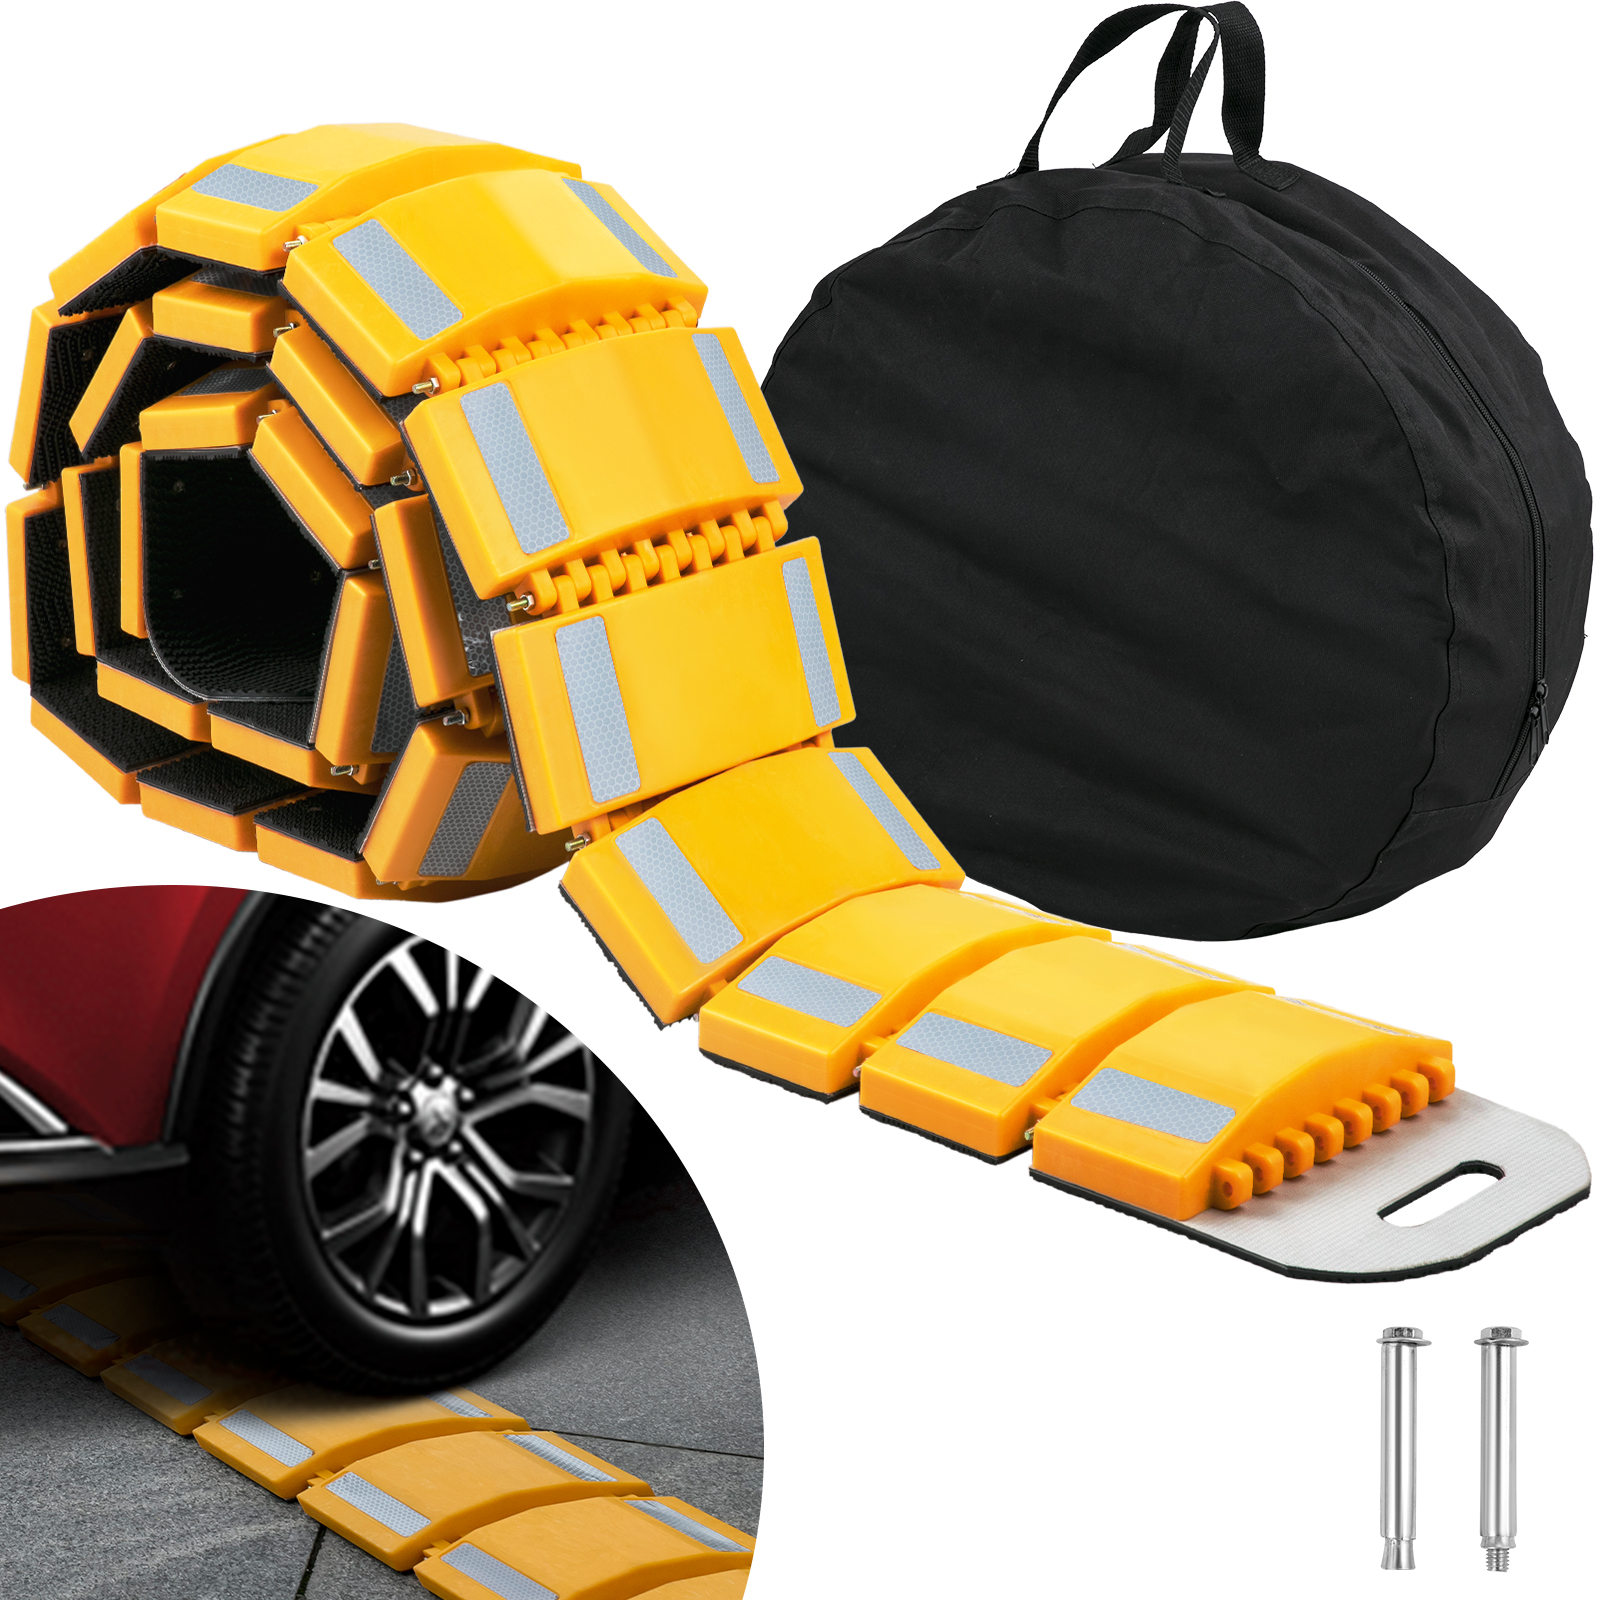 Vevor Portable Speed Bump Speed Hump 9.8 Ft Rubber Speed Bumps For Driveway от Vevor Many GEOs